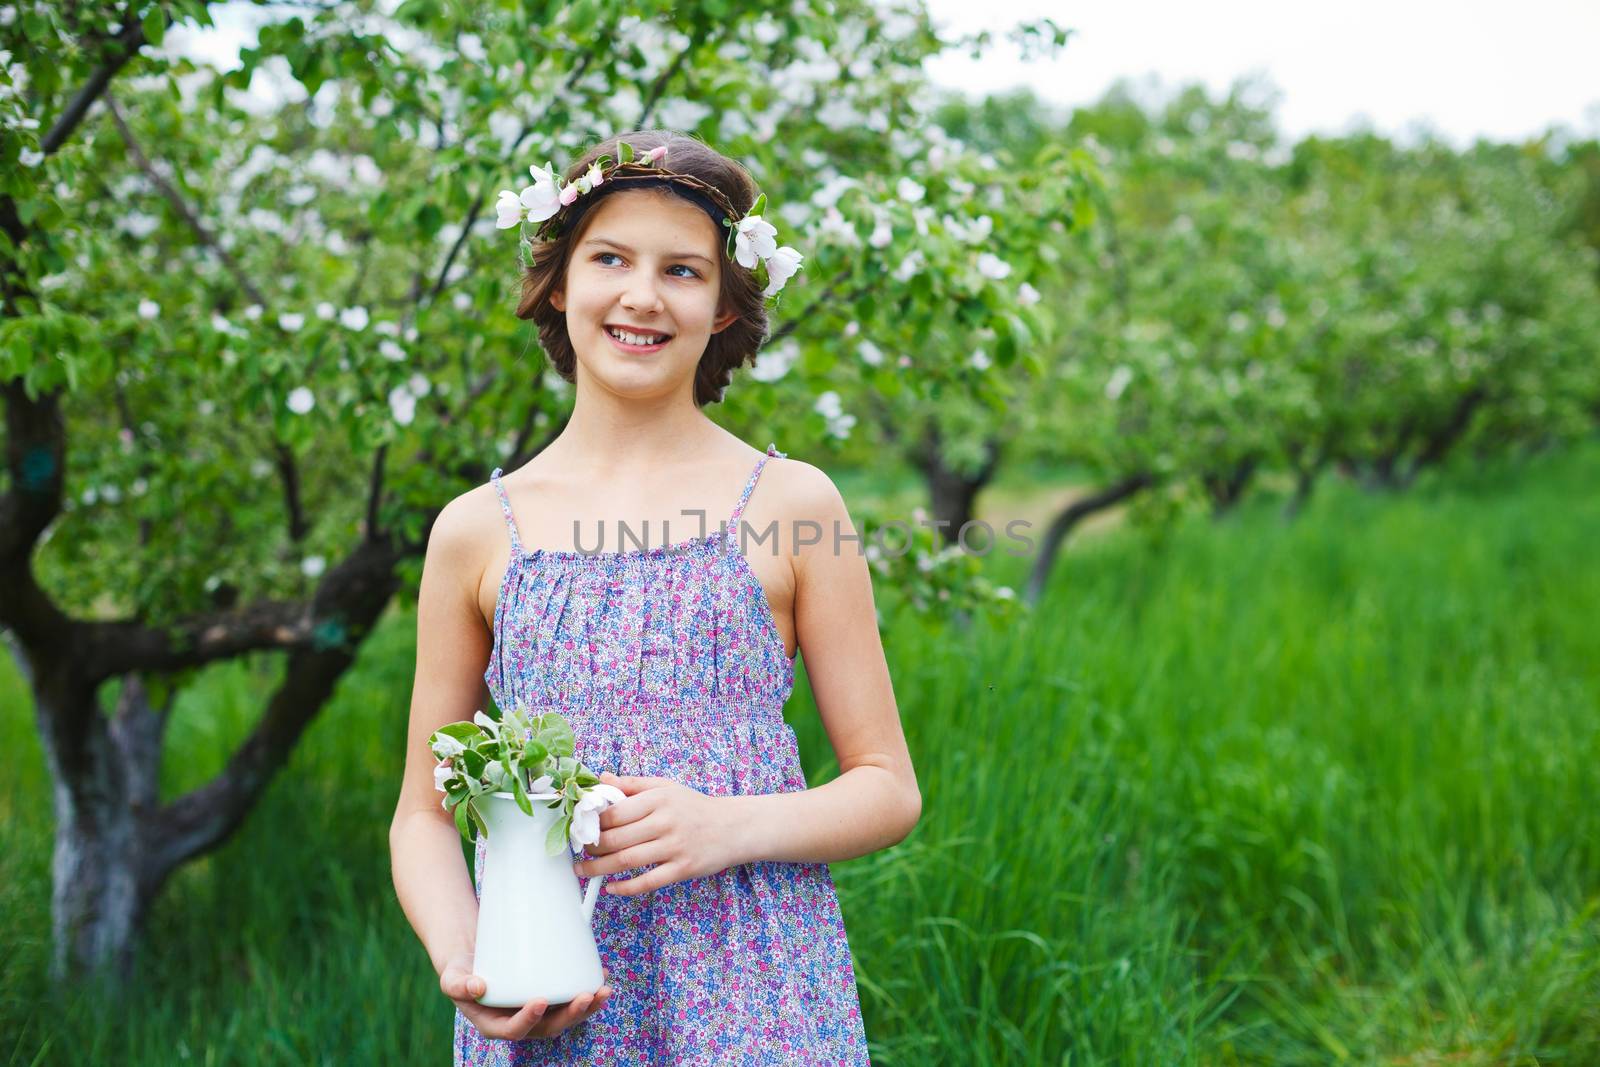 Adorable girl in blooming apple tree garden on spring day